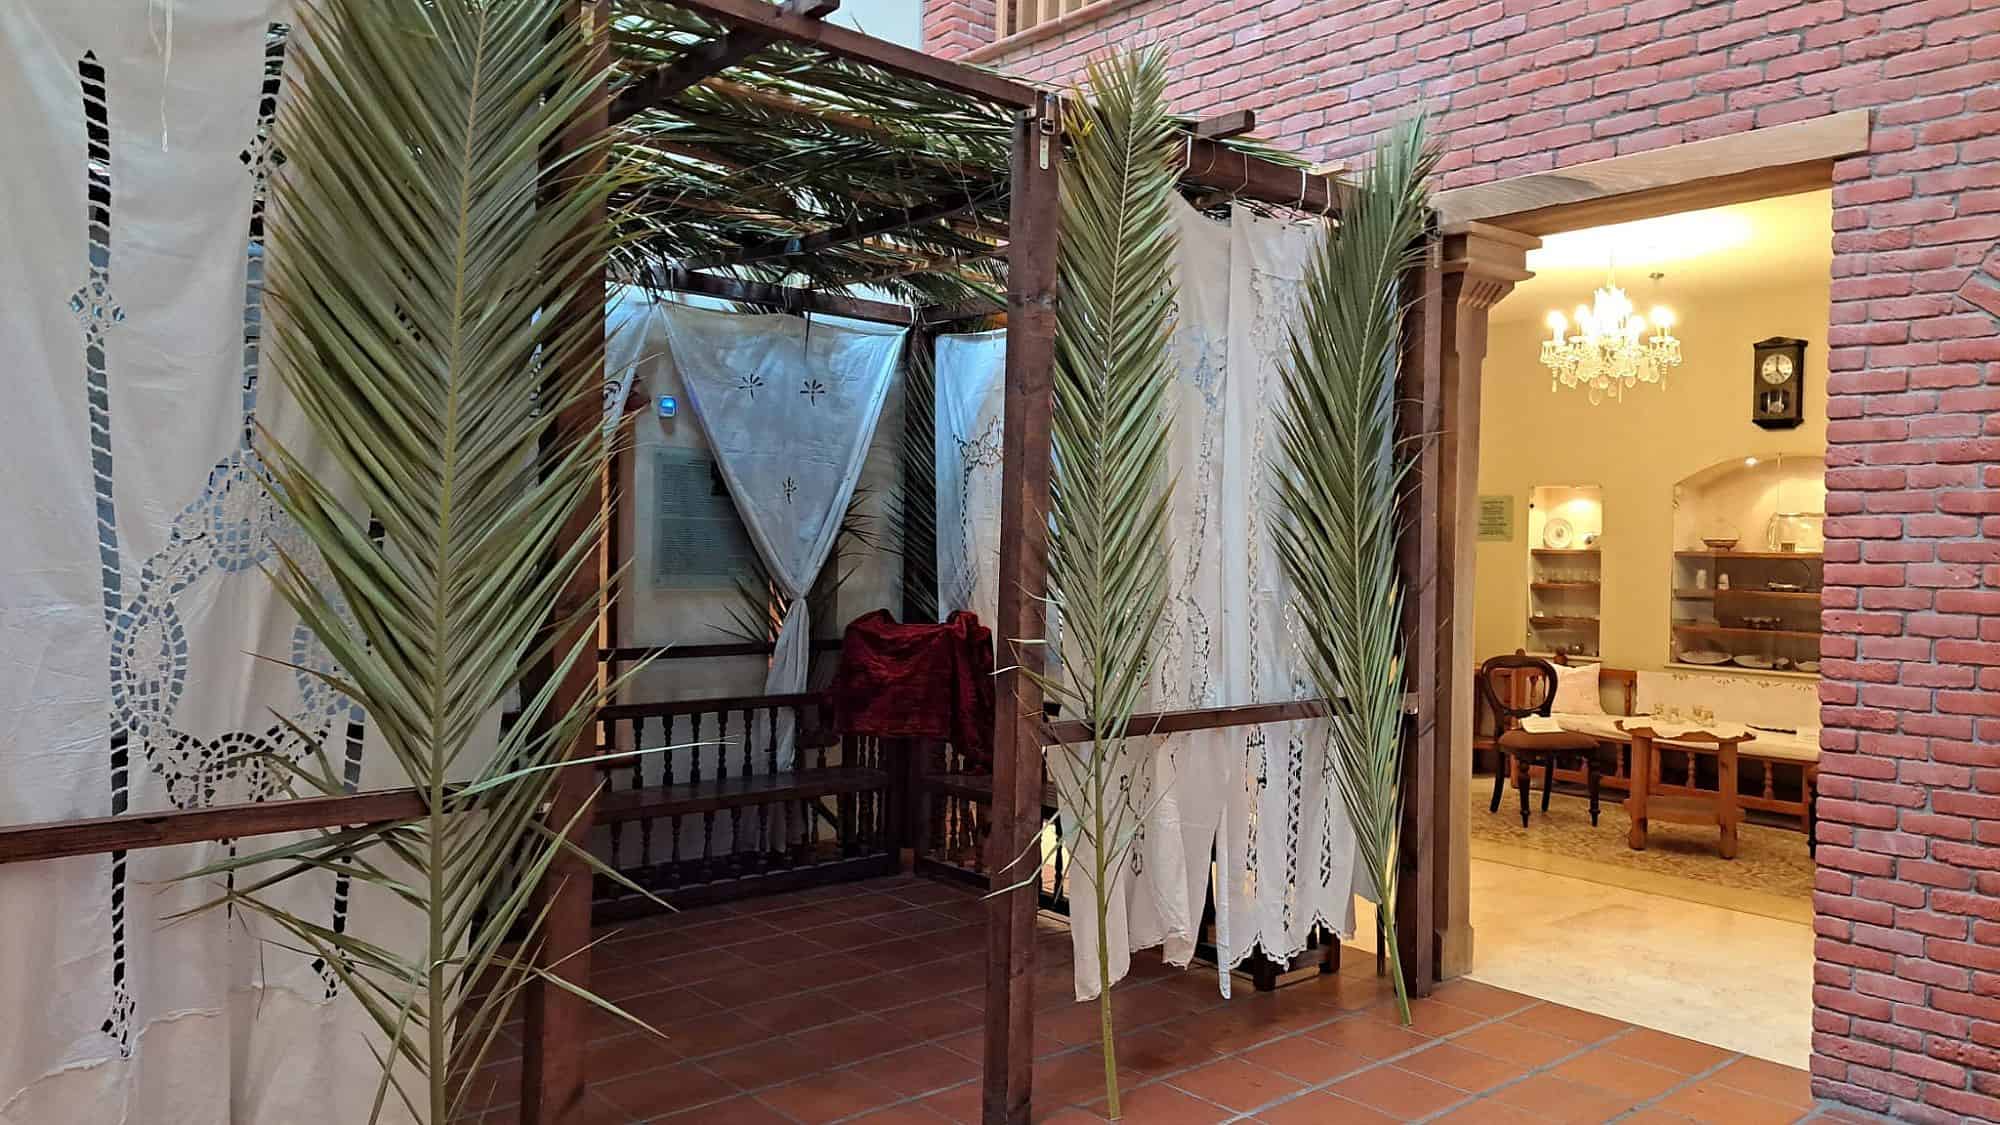 A seasonal sukkah on view at the Babylonian Jewry Heritage Center in Or-Yehuda, Israel. Credit: Babylonian Jewry Heritage Center.